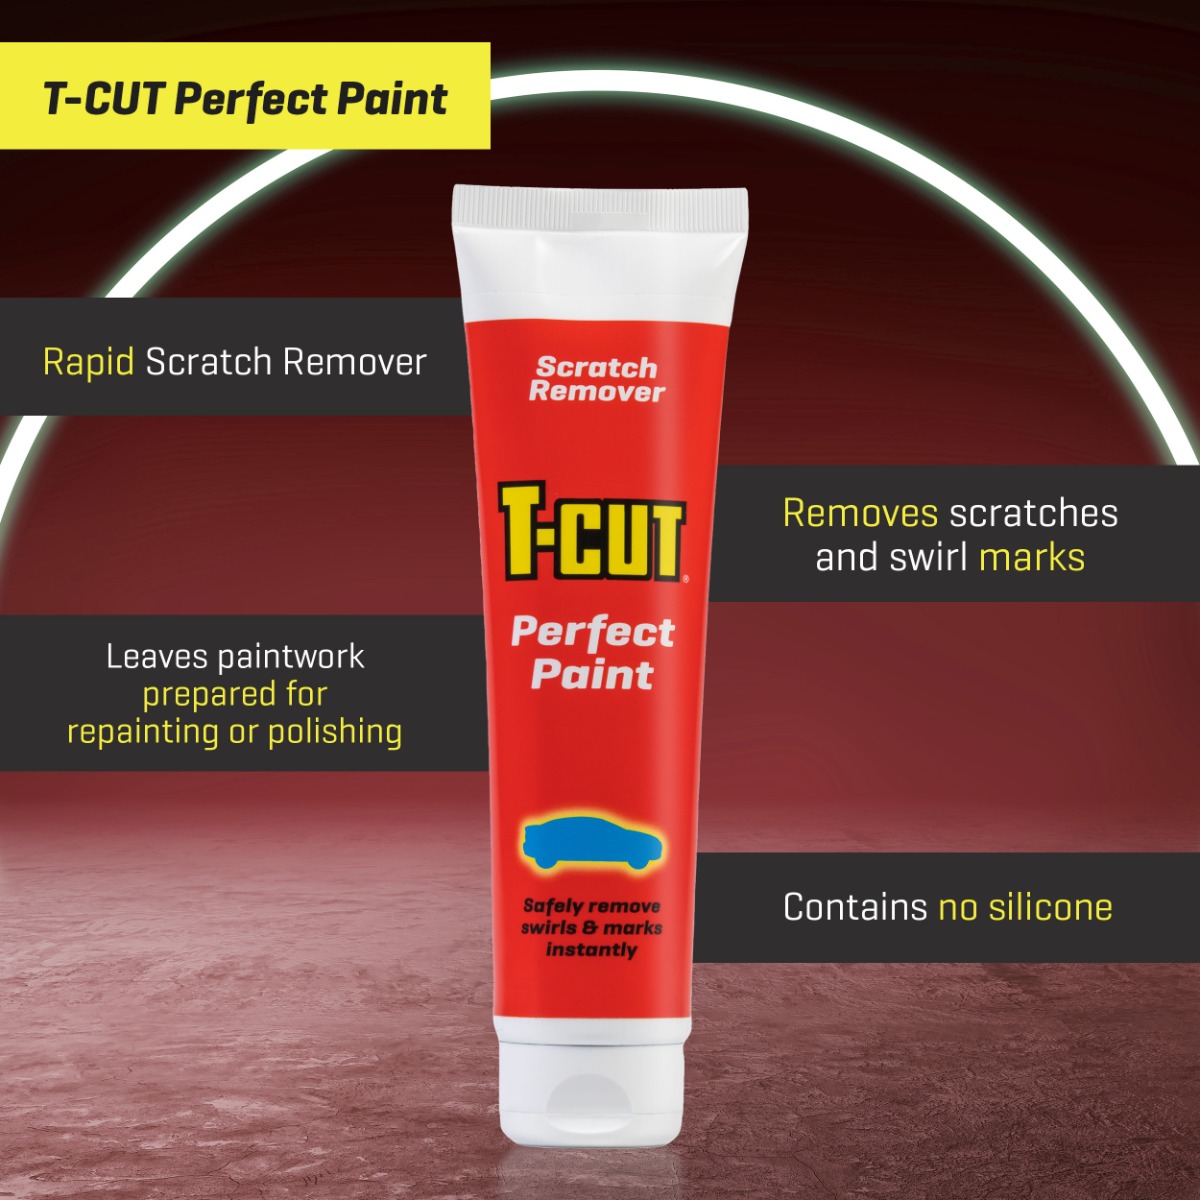 Benefits of T-Cut Perfect Paint